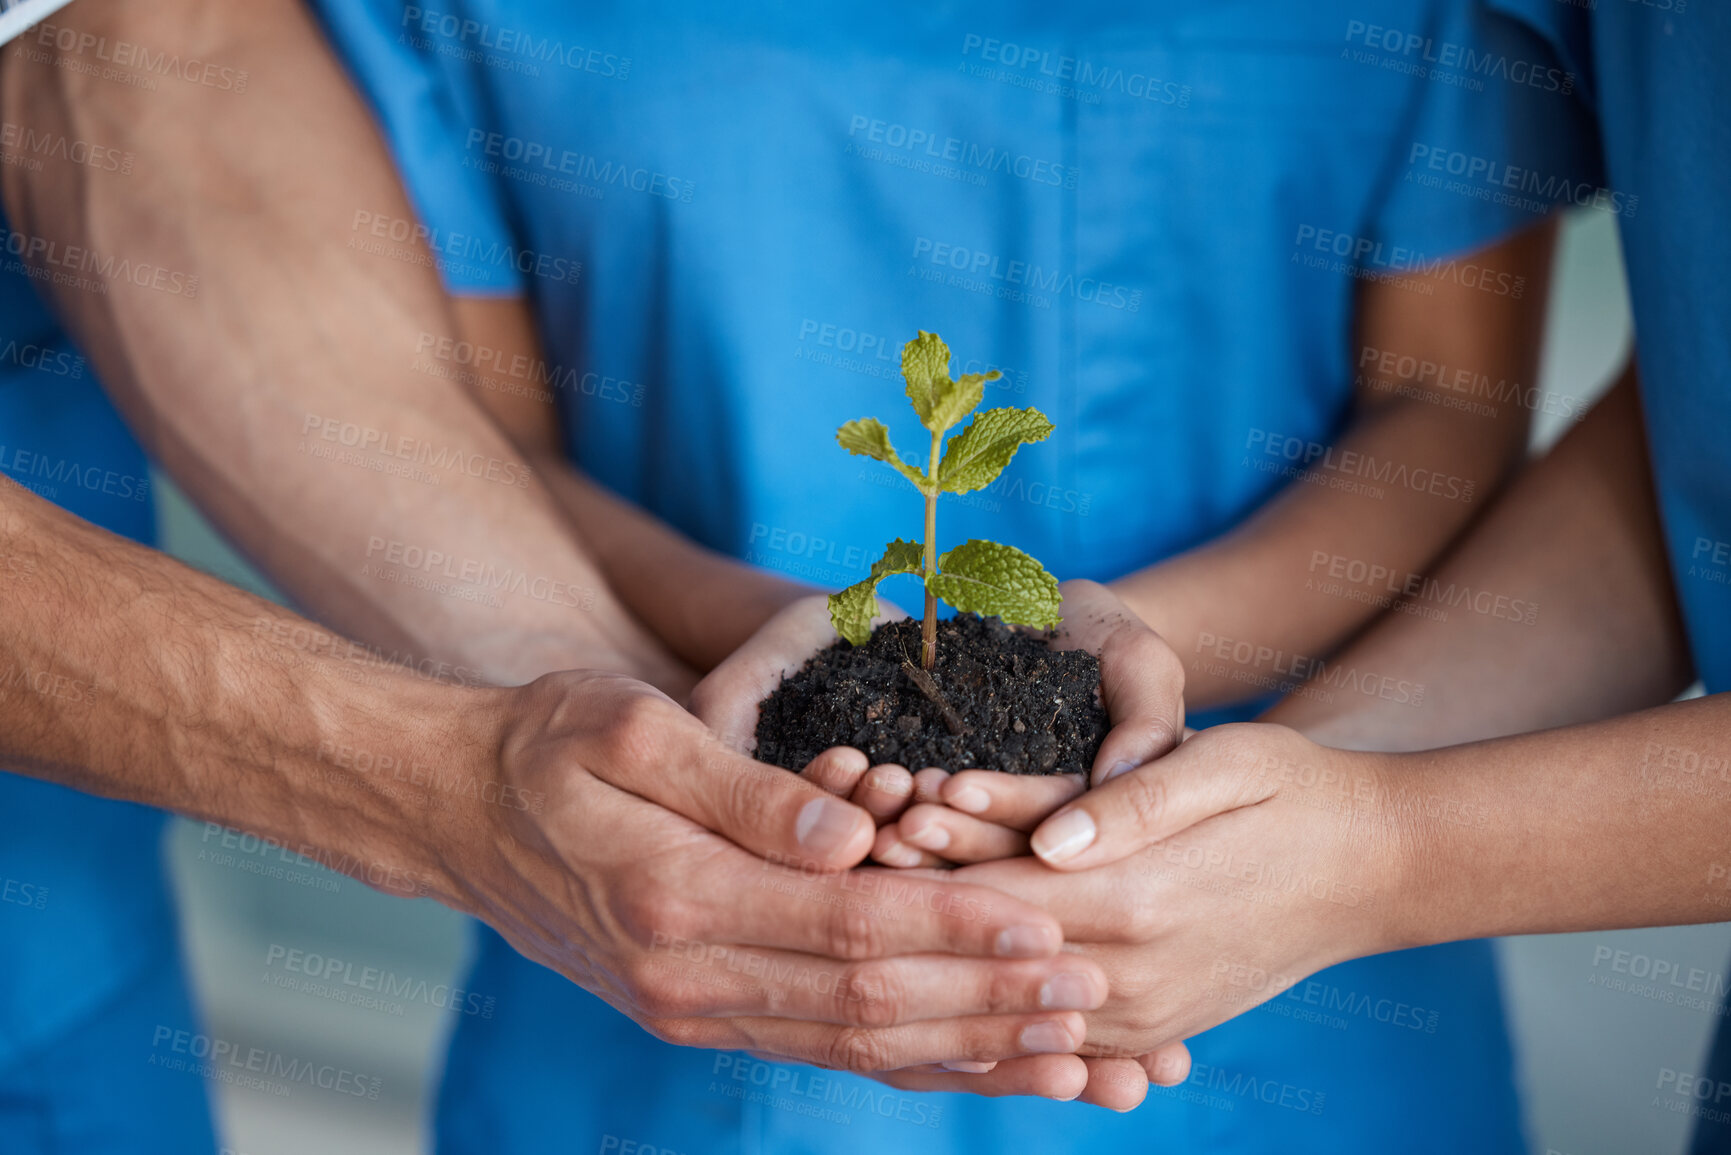 Buy stock photo Shot of a medical team holding a growing plant